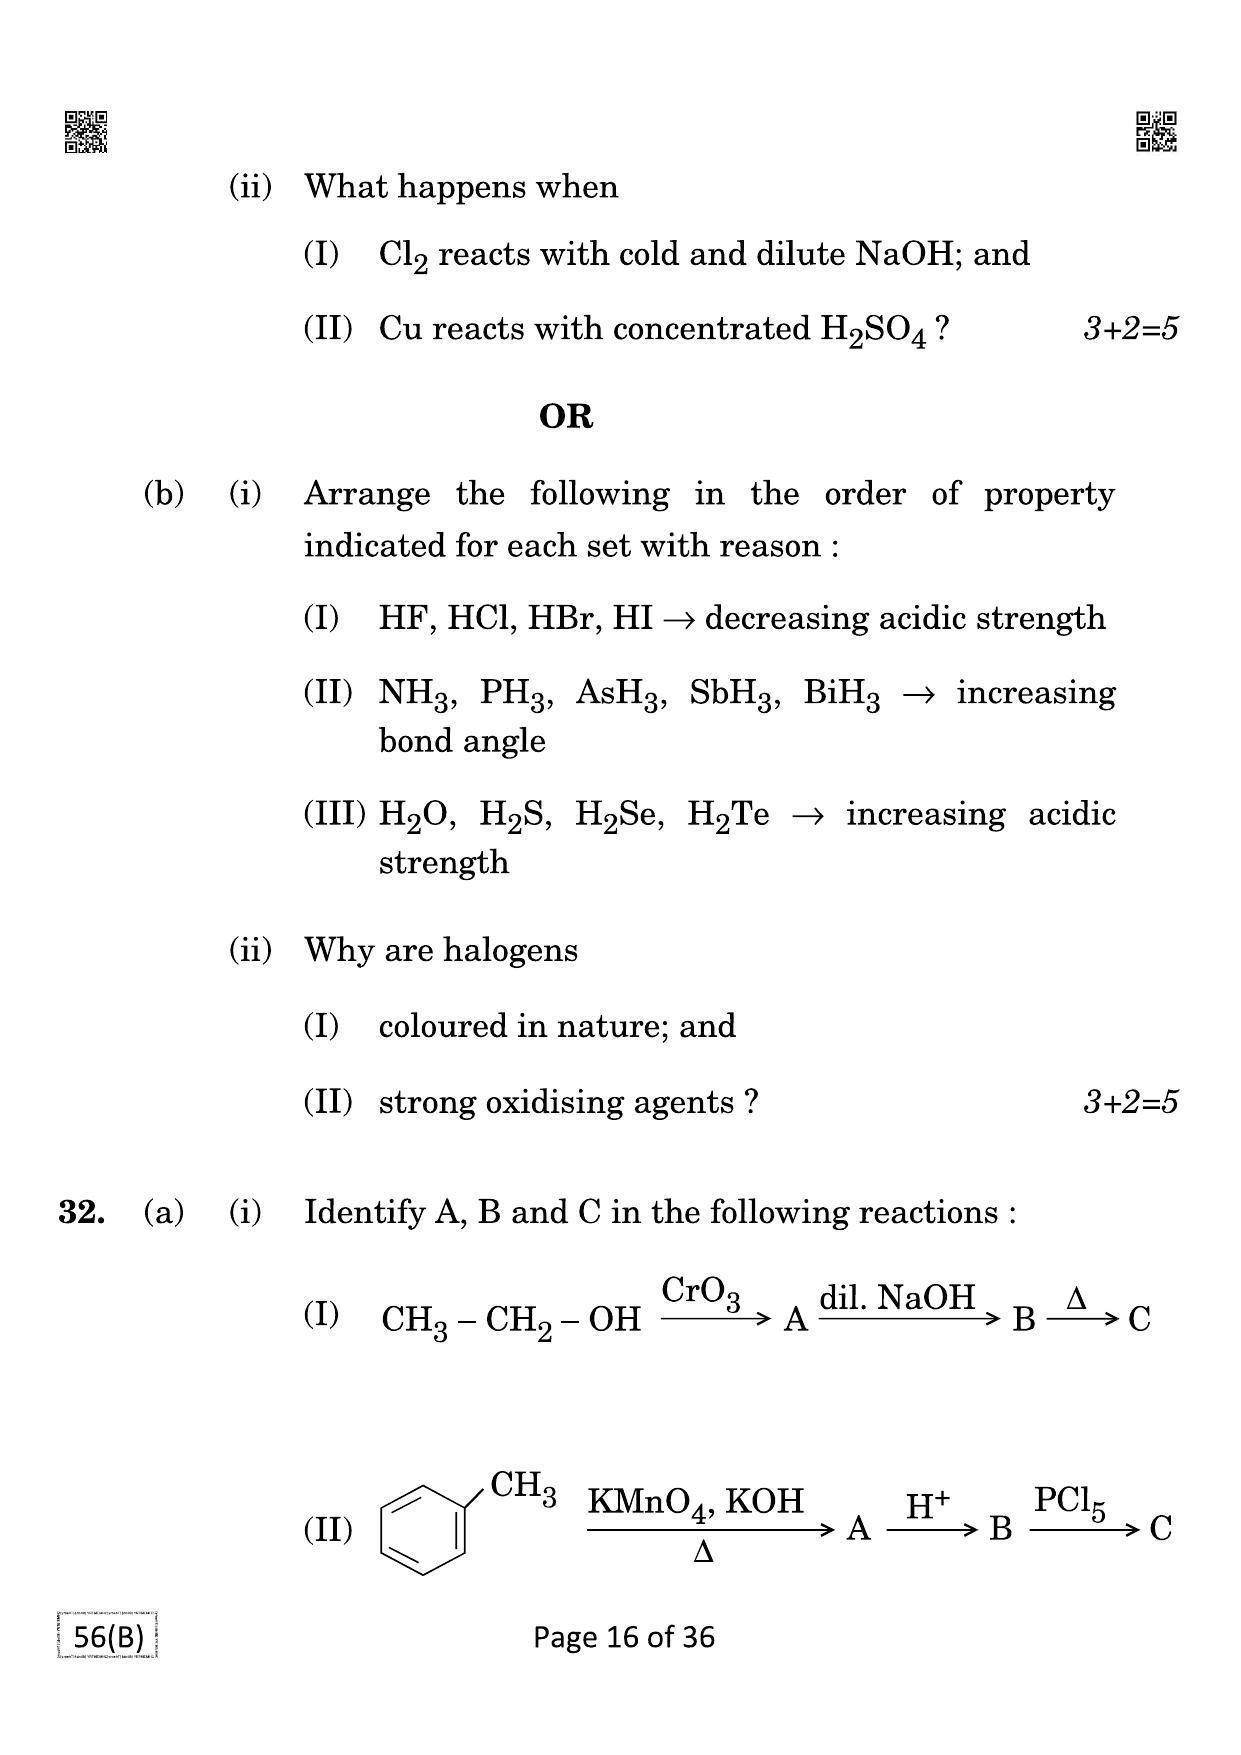 CBSE Class 12 QP_043_CHEMISTRY_FOR_BLIND_CANDIDATES 2021 Compartment Question Paper - Page 16